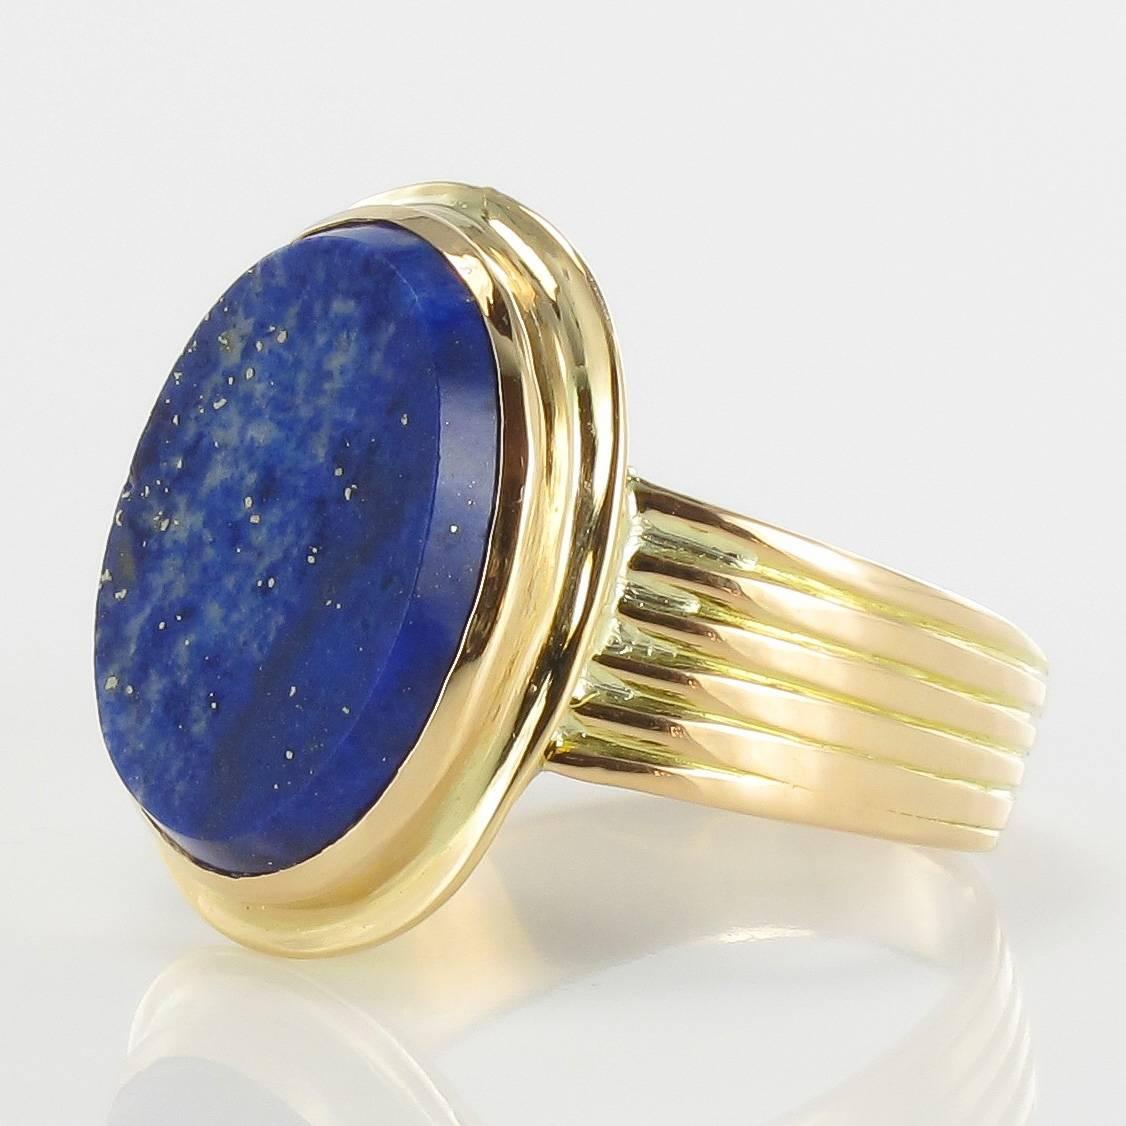 18 carats yellow gold ring.

This splendid old ring is set closed by an oval lapis lazuli. The ring is gadrooned all round.

Height: 18.5 mm, Width: 14 mm, Thickness: 4 mm, Width of the ring at the base: 4.3 mm.
Total weight: 4.3 g